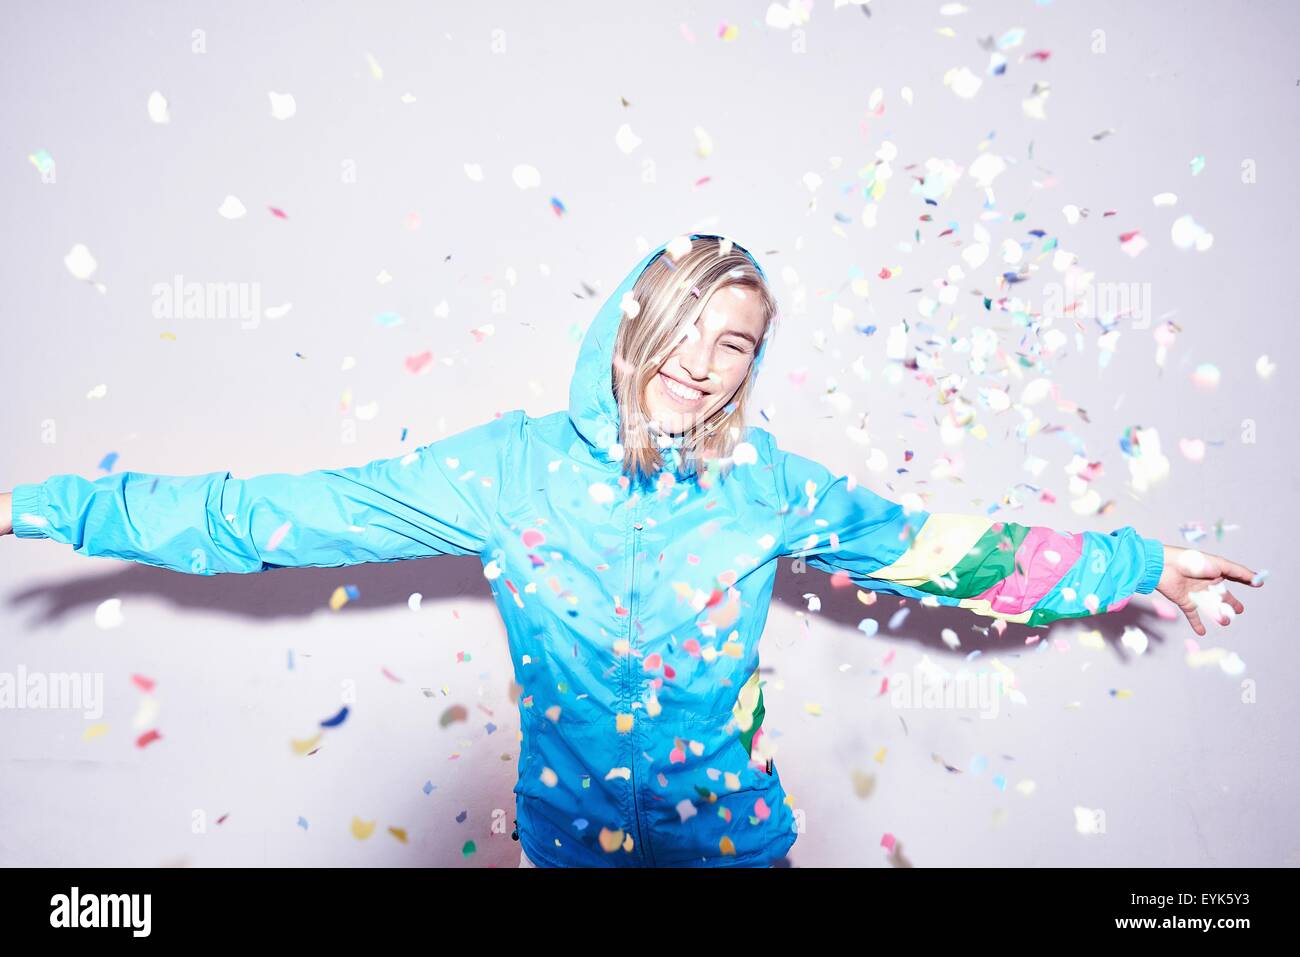 Studio portrait of young woman throwing confetti Stock Photo